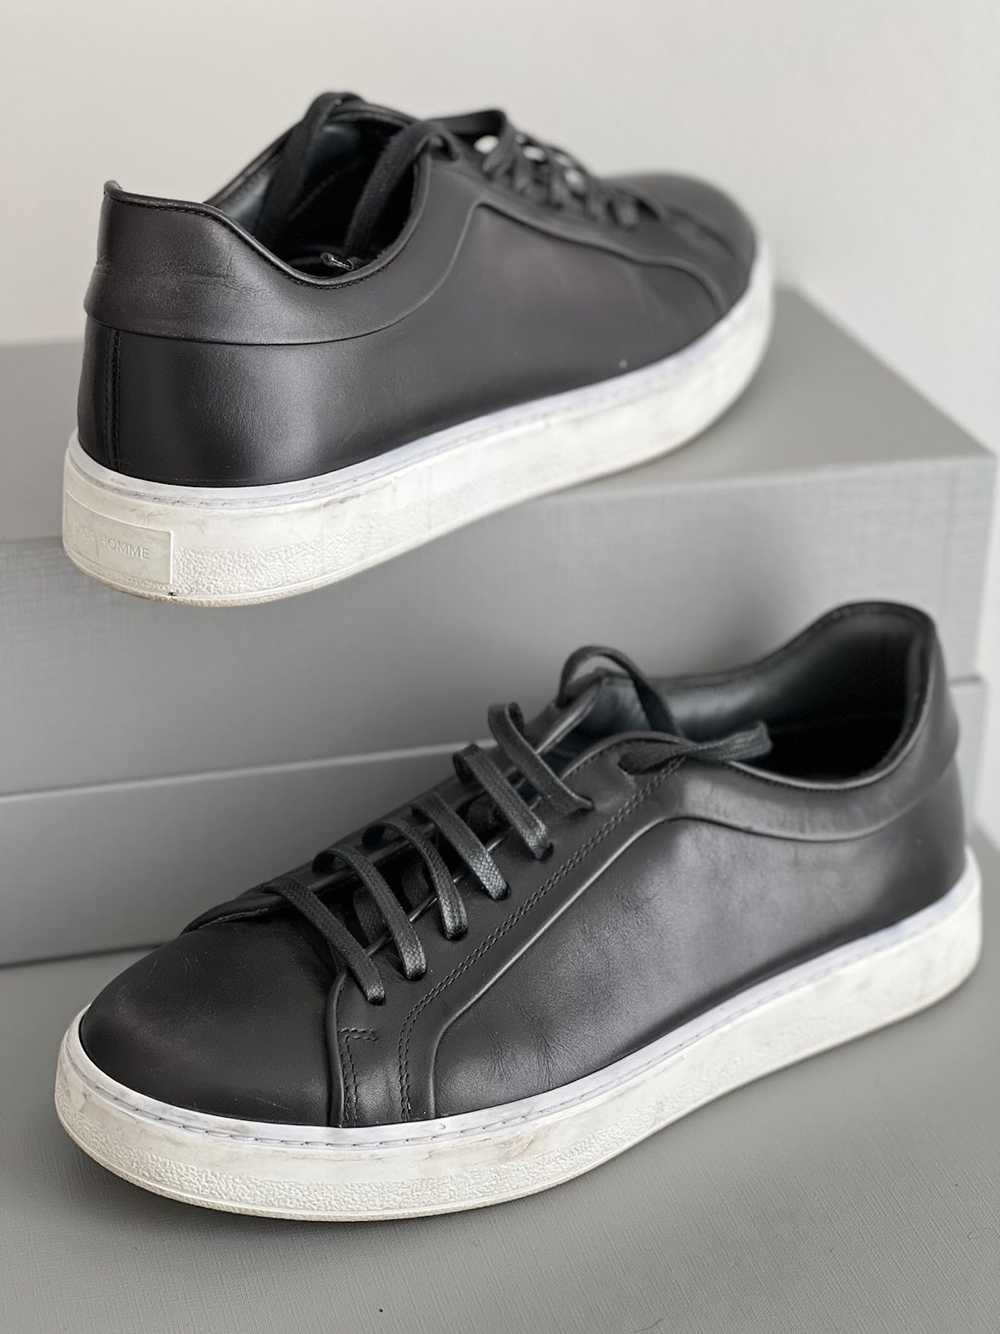 Dior Basic Dior Homme black & white sneakers - image 1